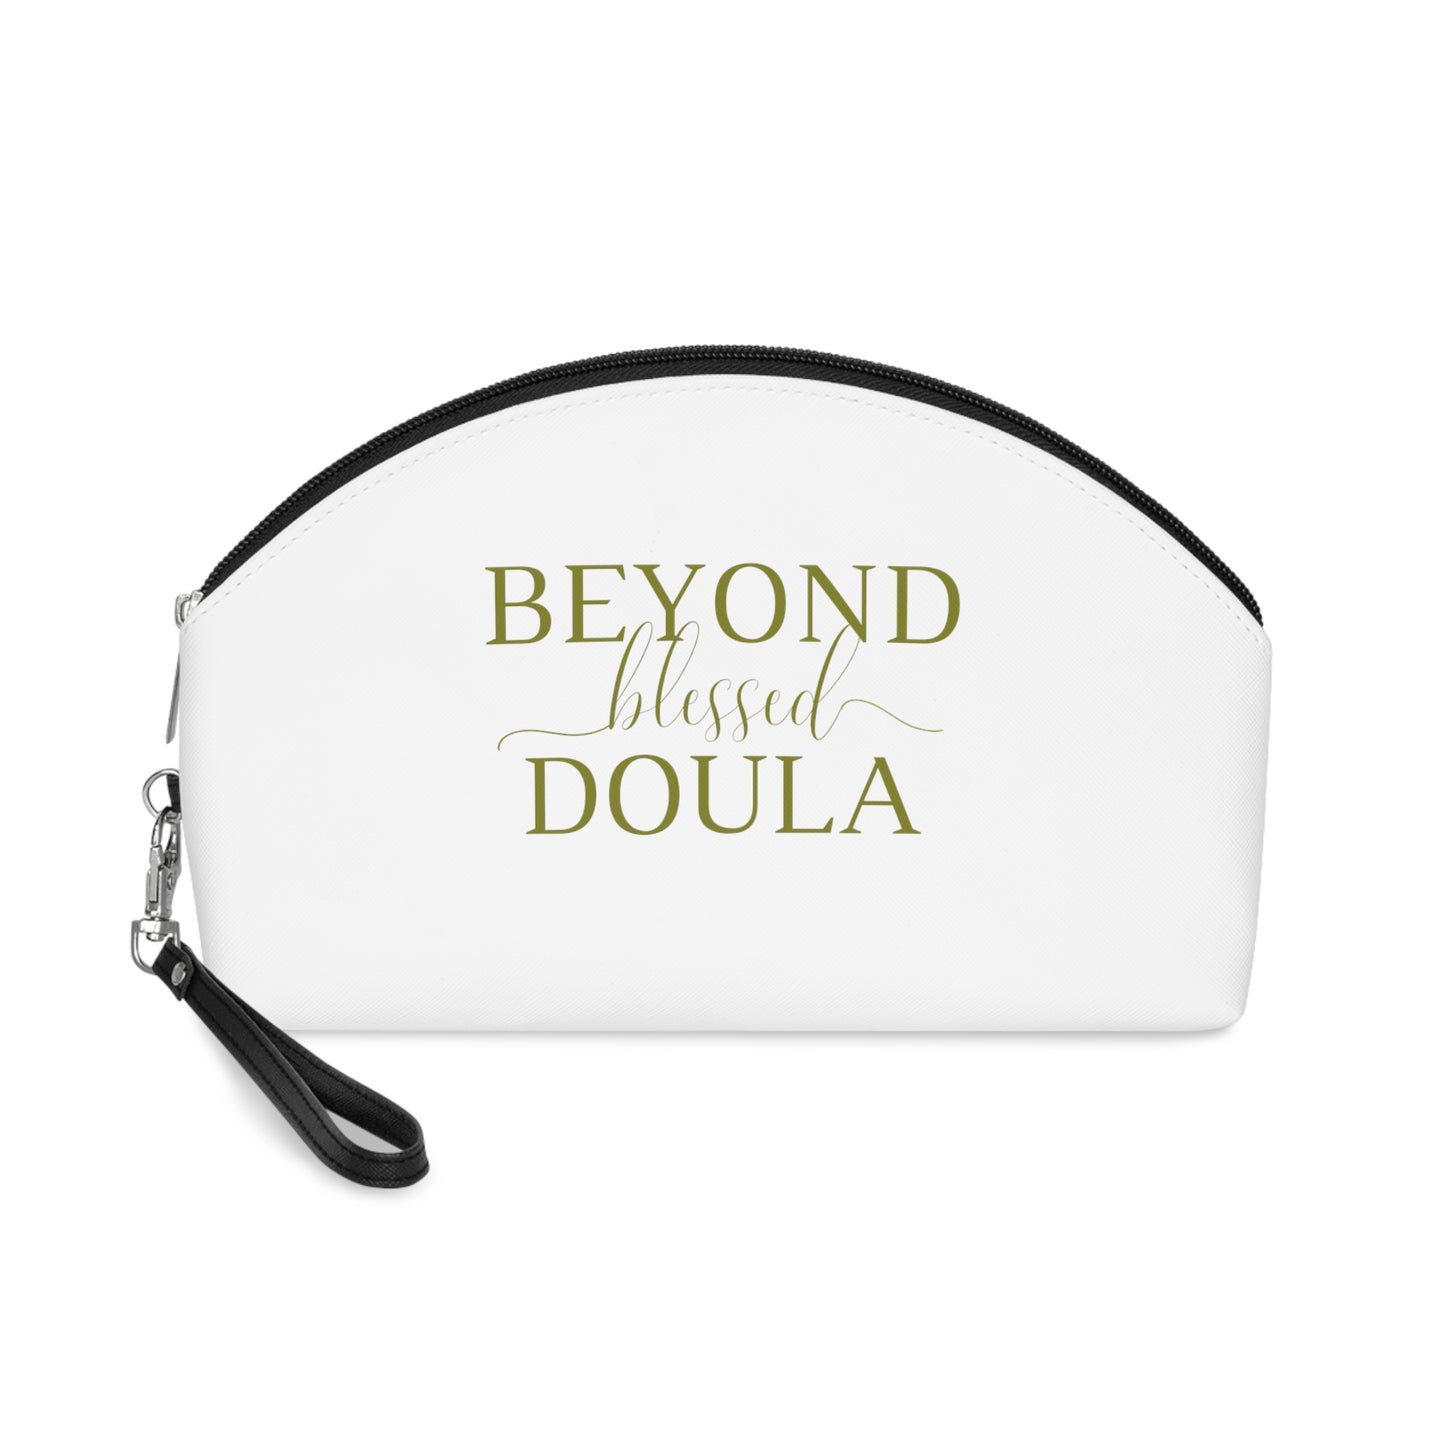 Beyond Blessed Doula - Makeup Bag - Olive Green